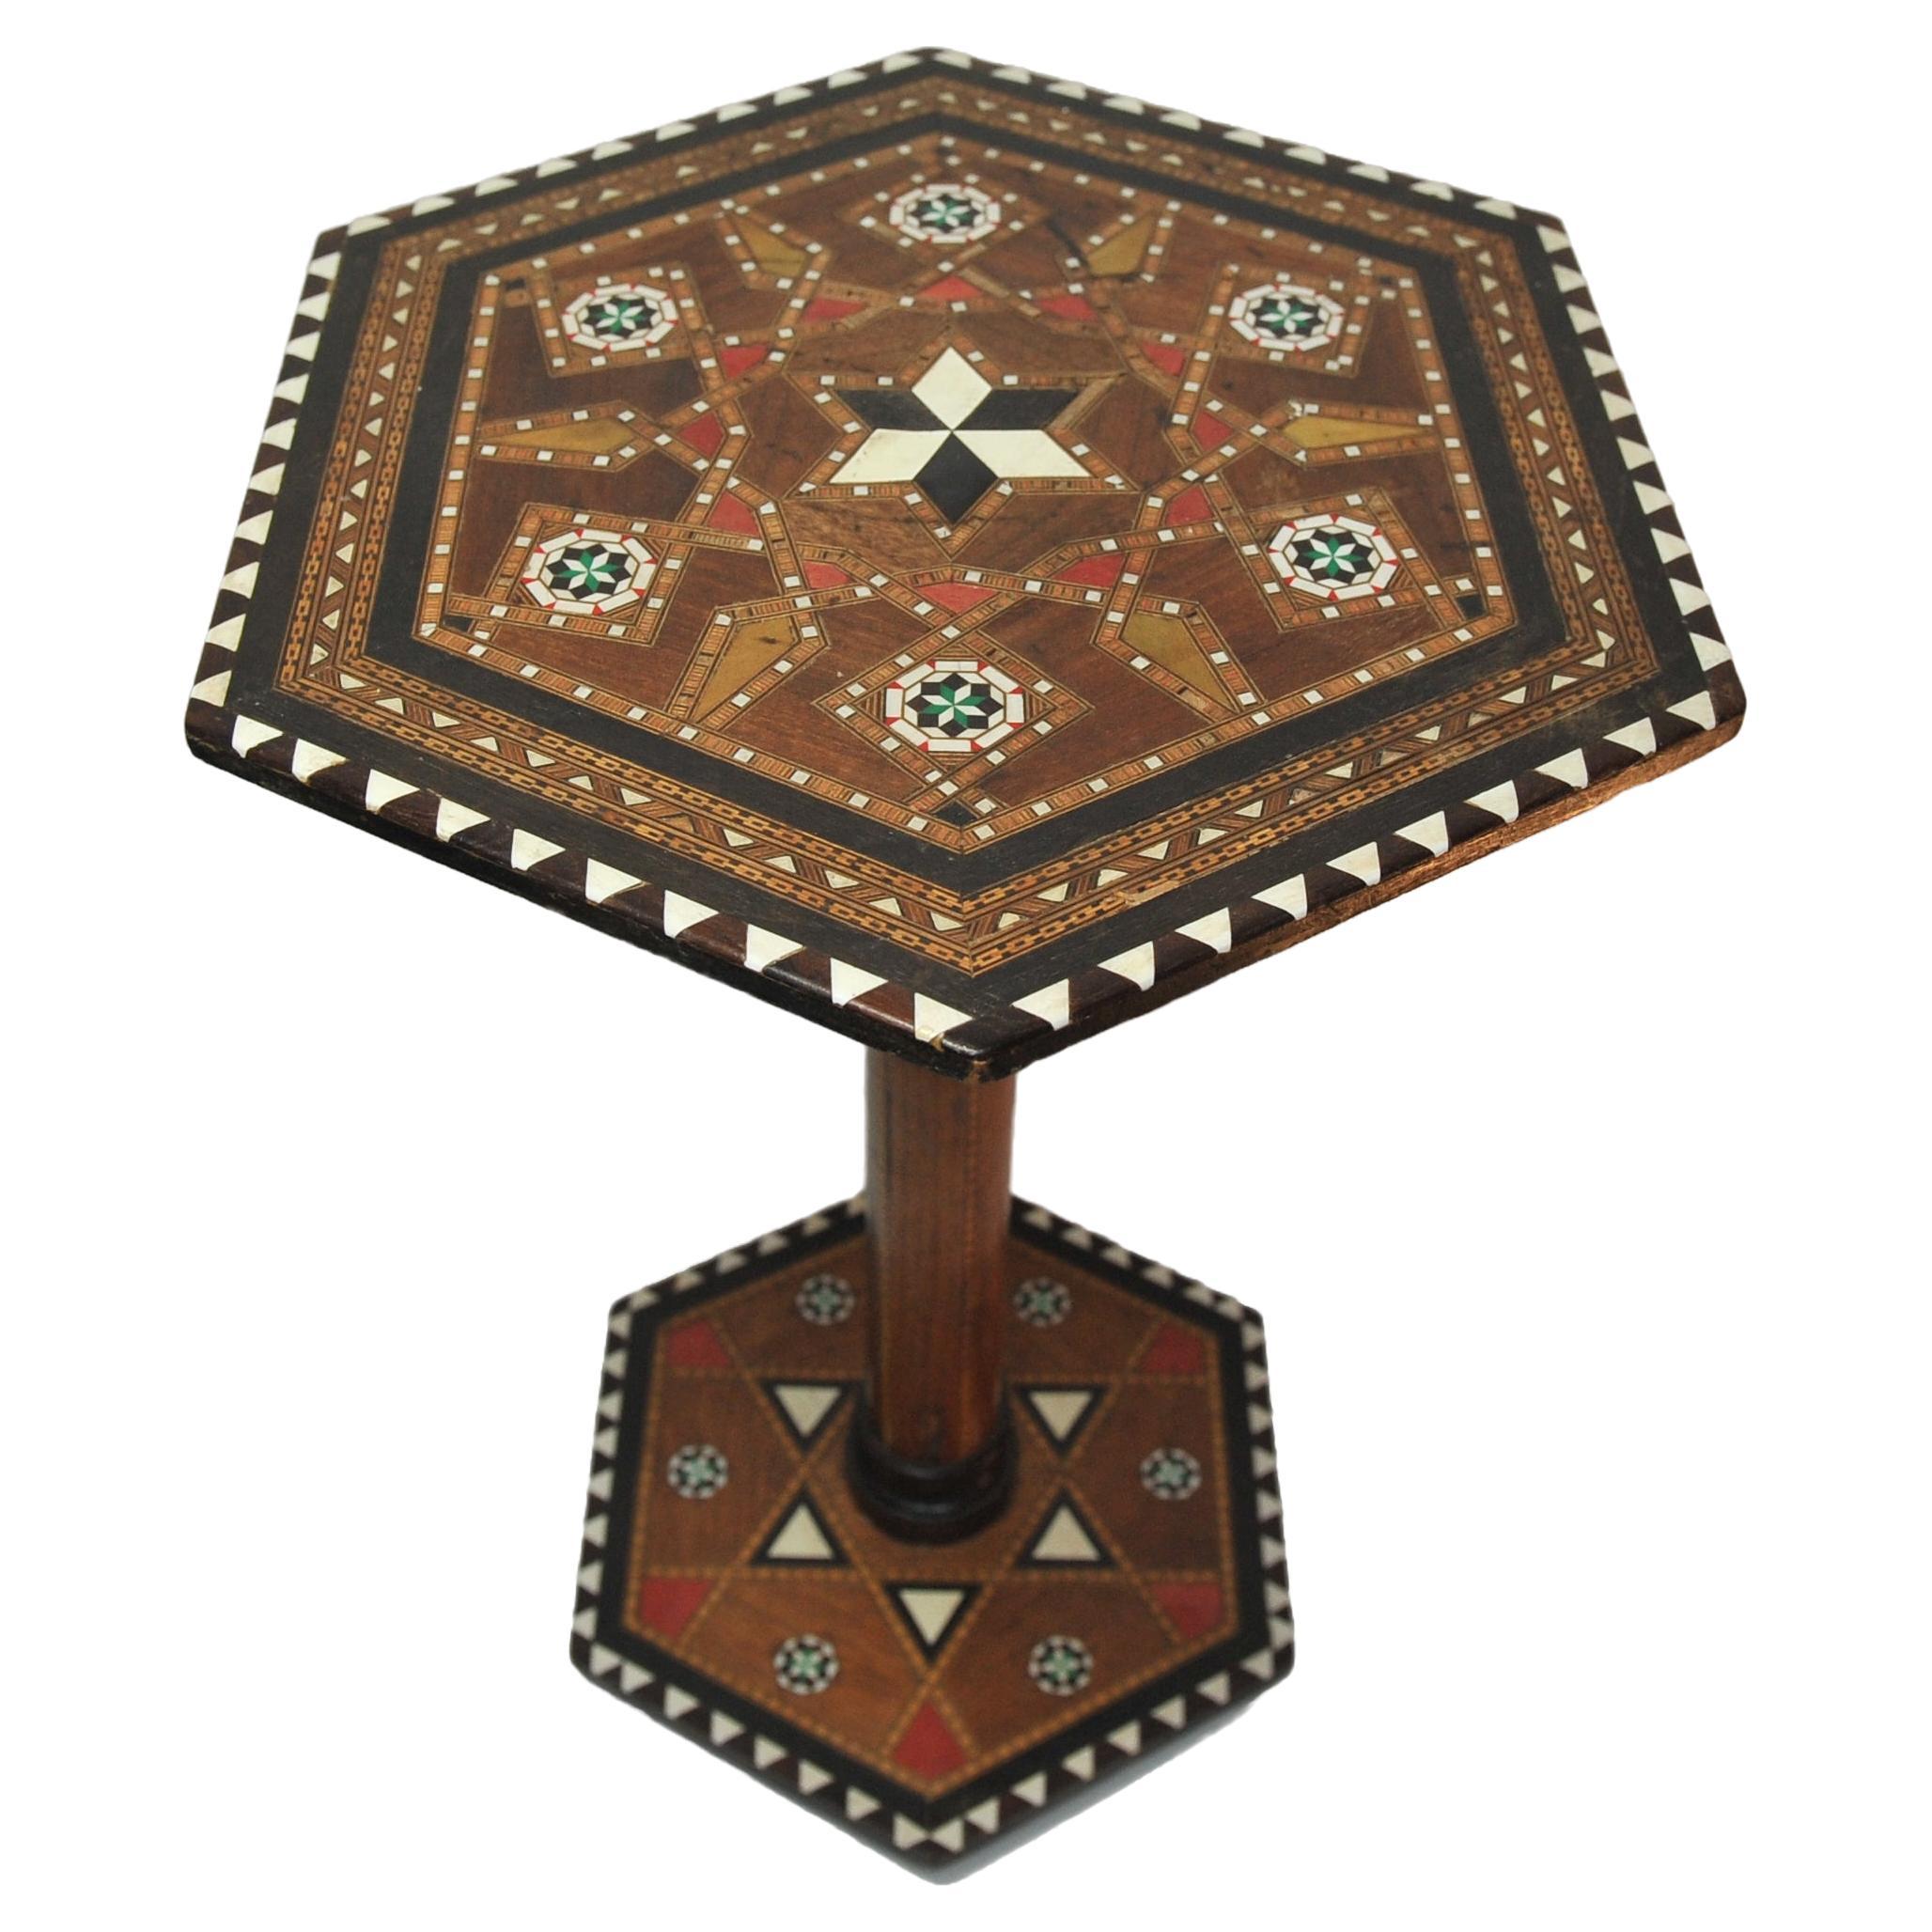 A 19th Century Hexagonal Damascene Fruitwood Tea Table With Mosaic Detailing  For Sale